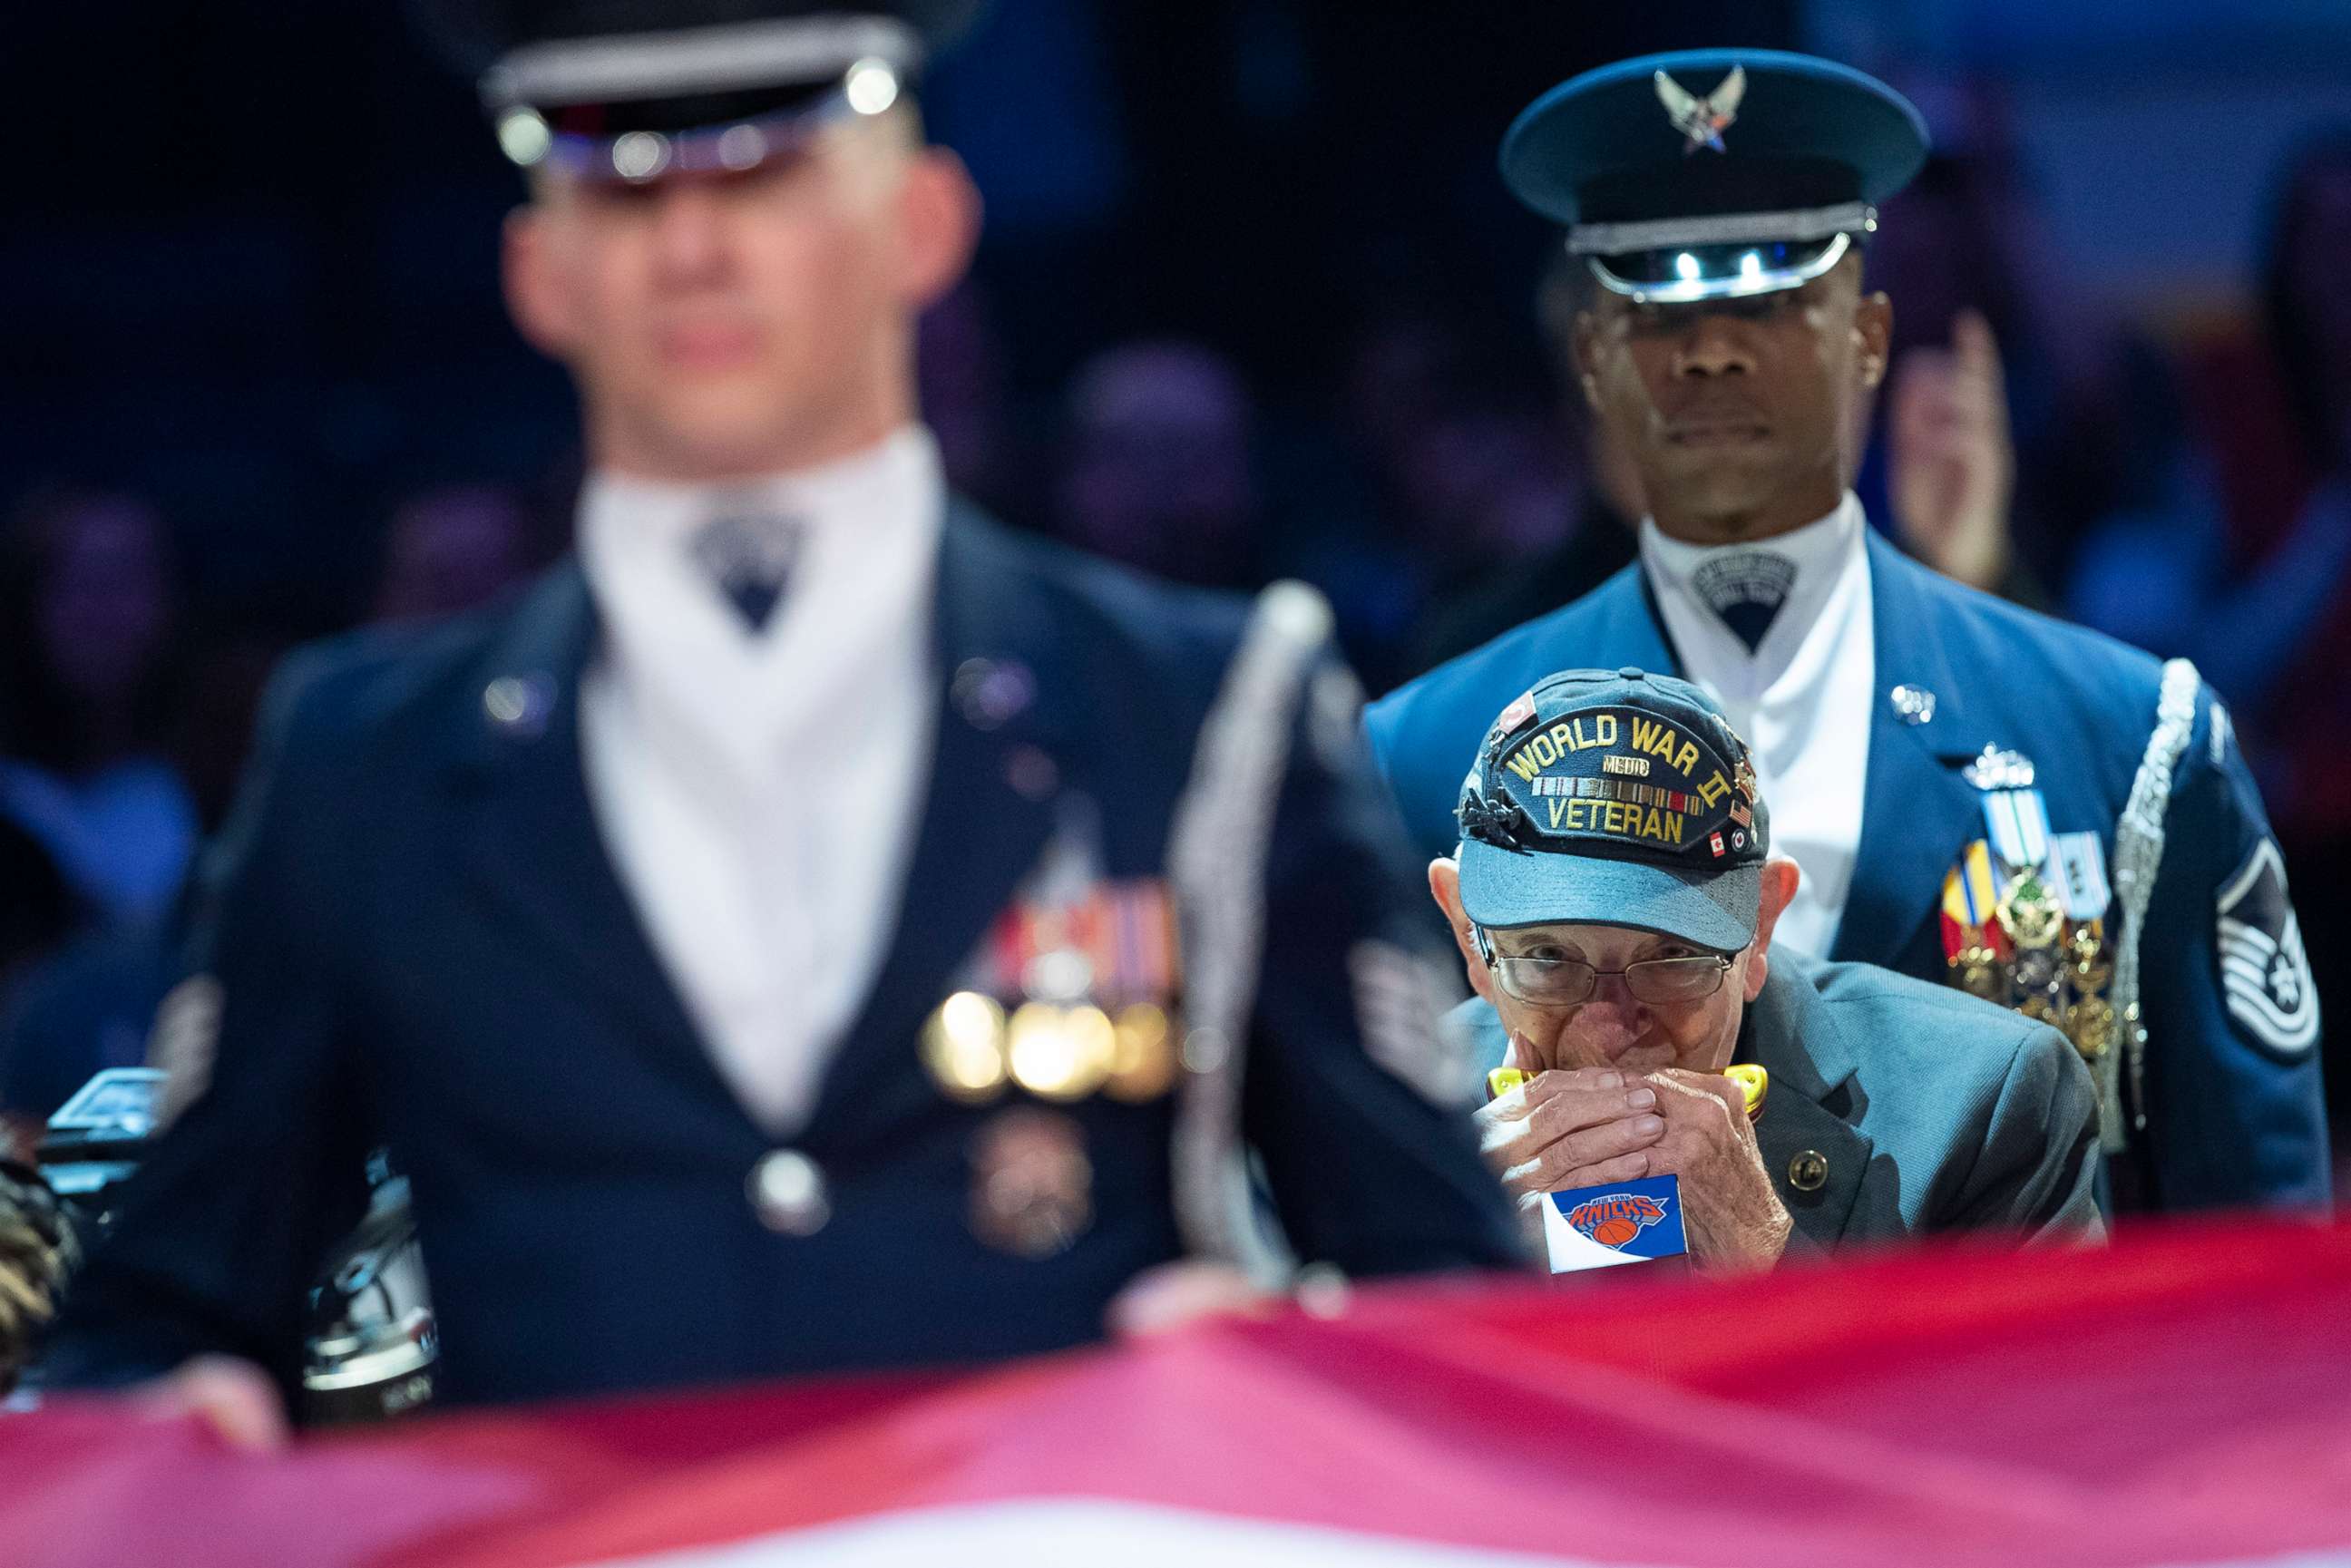 PHOTO: World War II veteran Pete Dupre, 96, plays the national anthem on his harmonica before an NBA basketball game between the New York Knicks and the Cleveland Cavaliers, Nov. 10, 2019, at Madison Square Garden in New York.